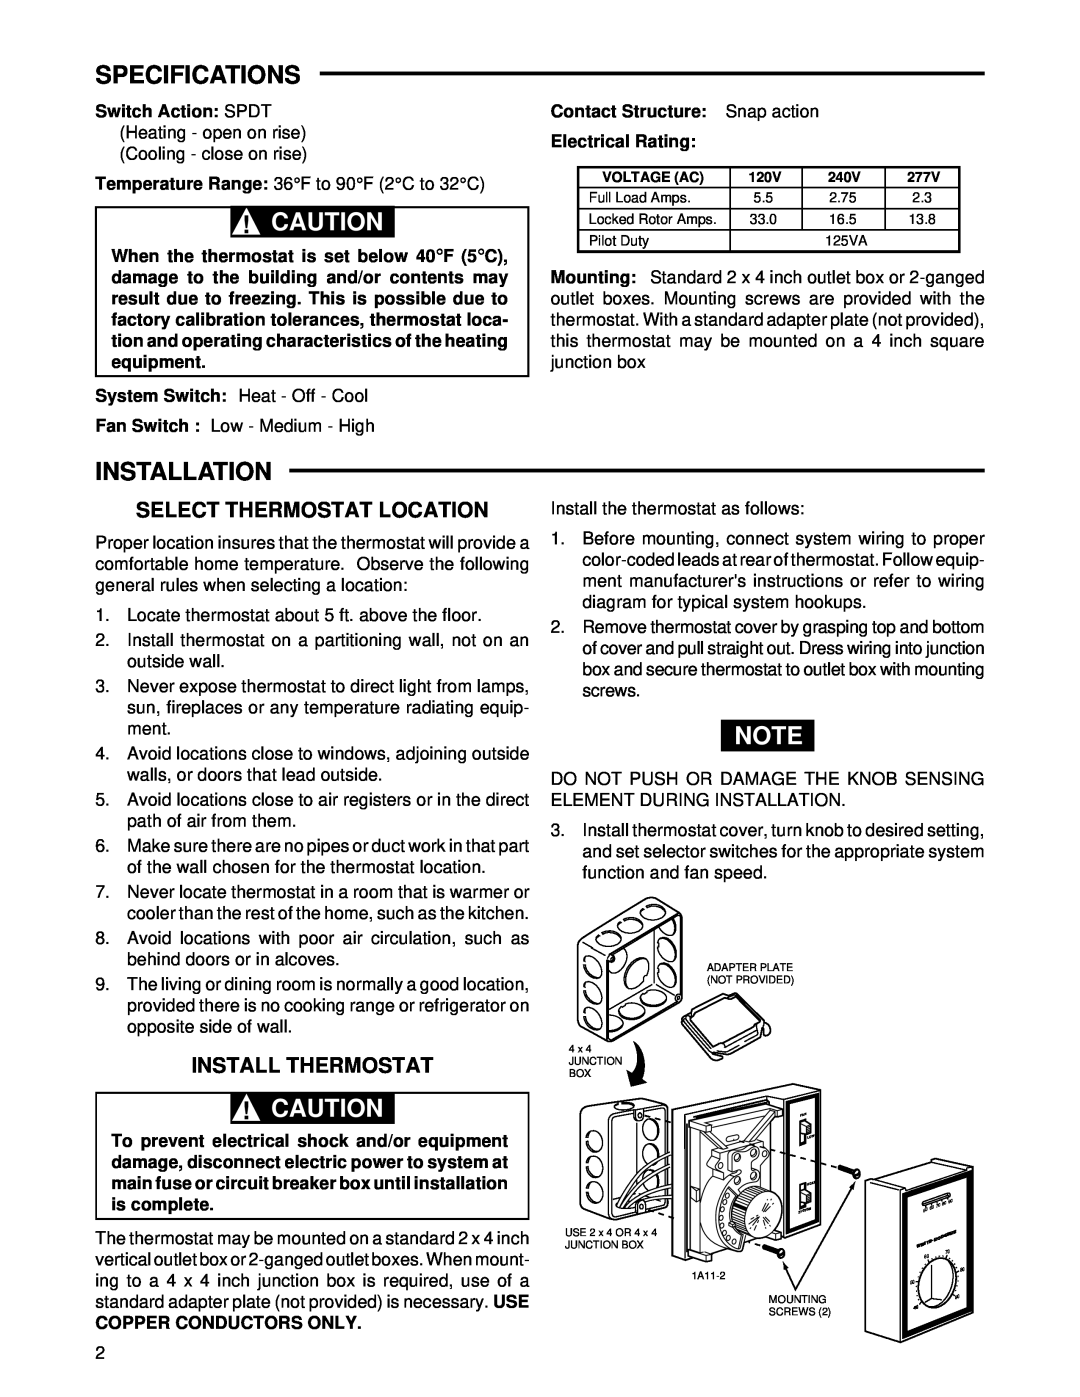 White Rodgers 1A11-2 installation instructions Specifications, Installation, Select Thermostat Location, Install Thermostat 